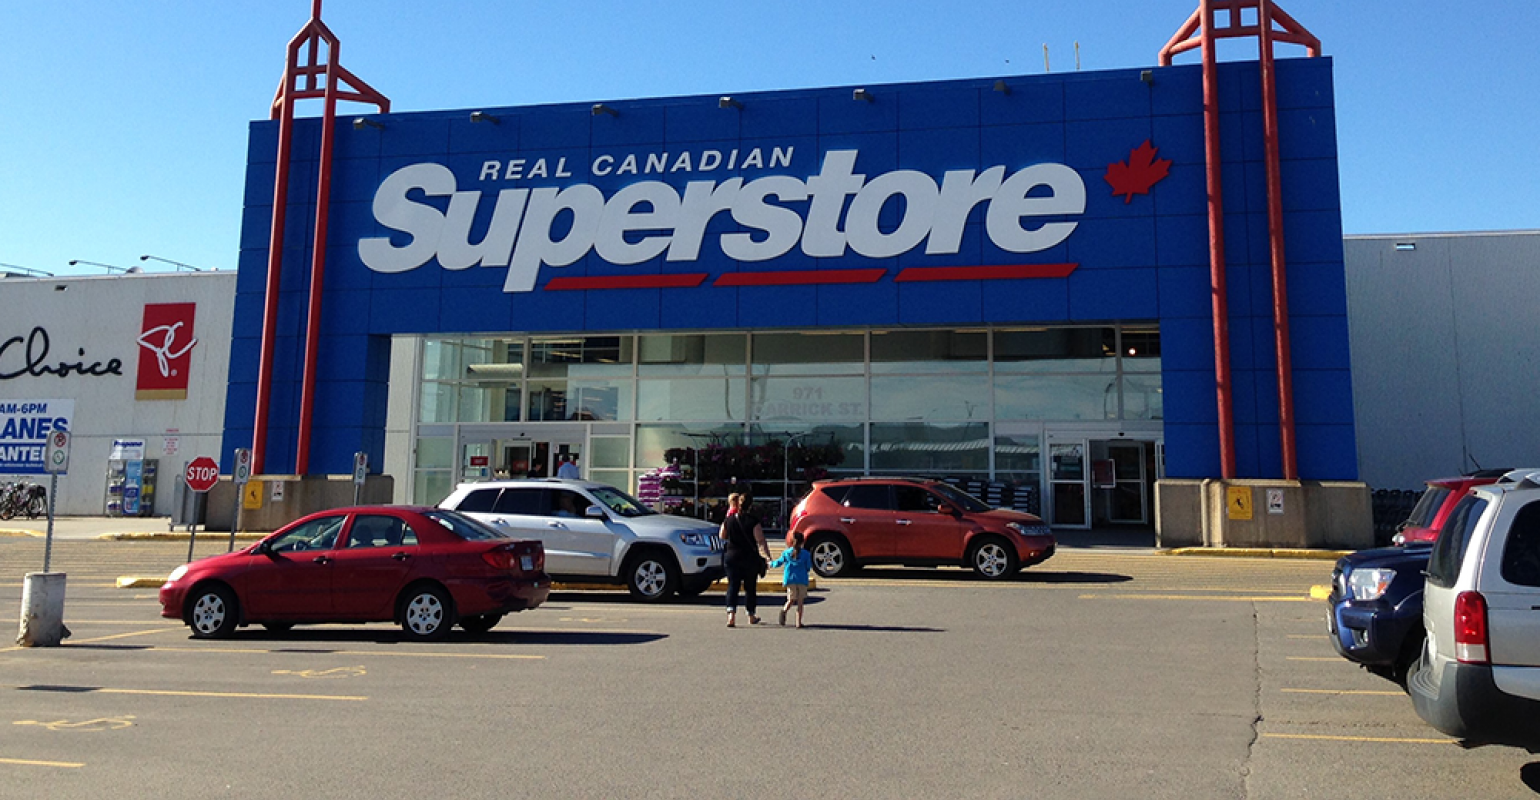 Real Canadian Superstore expands grocery home delivery